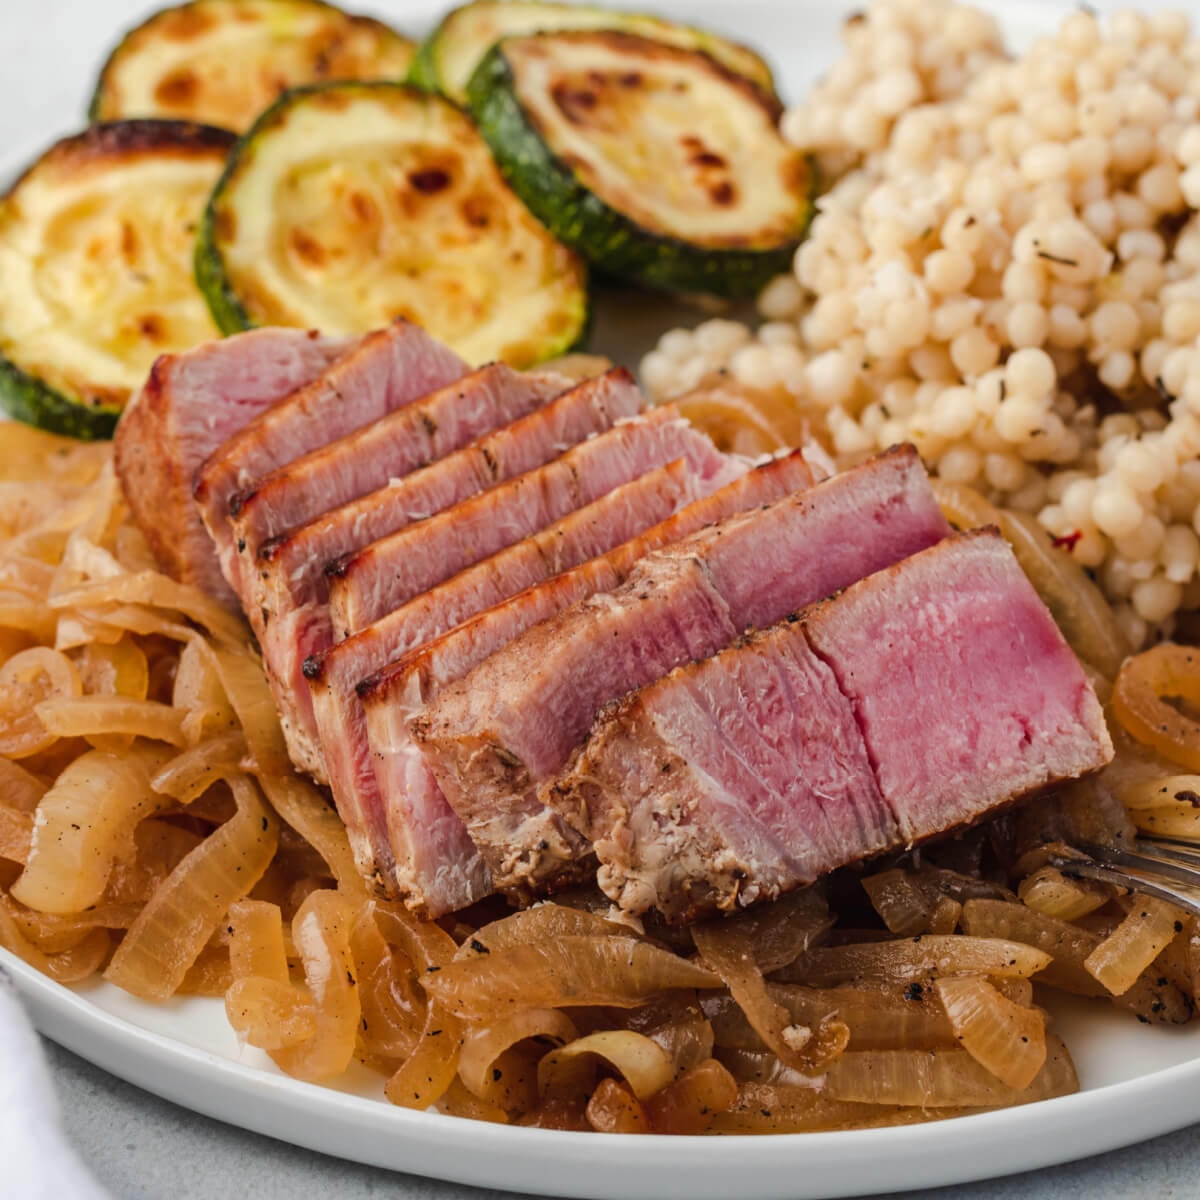 Sliced fresh yellowfin on a plate with onions, zucchini , and couscous.